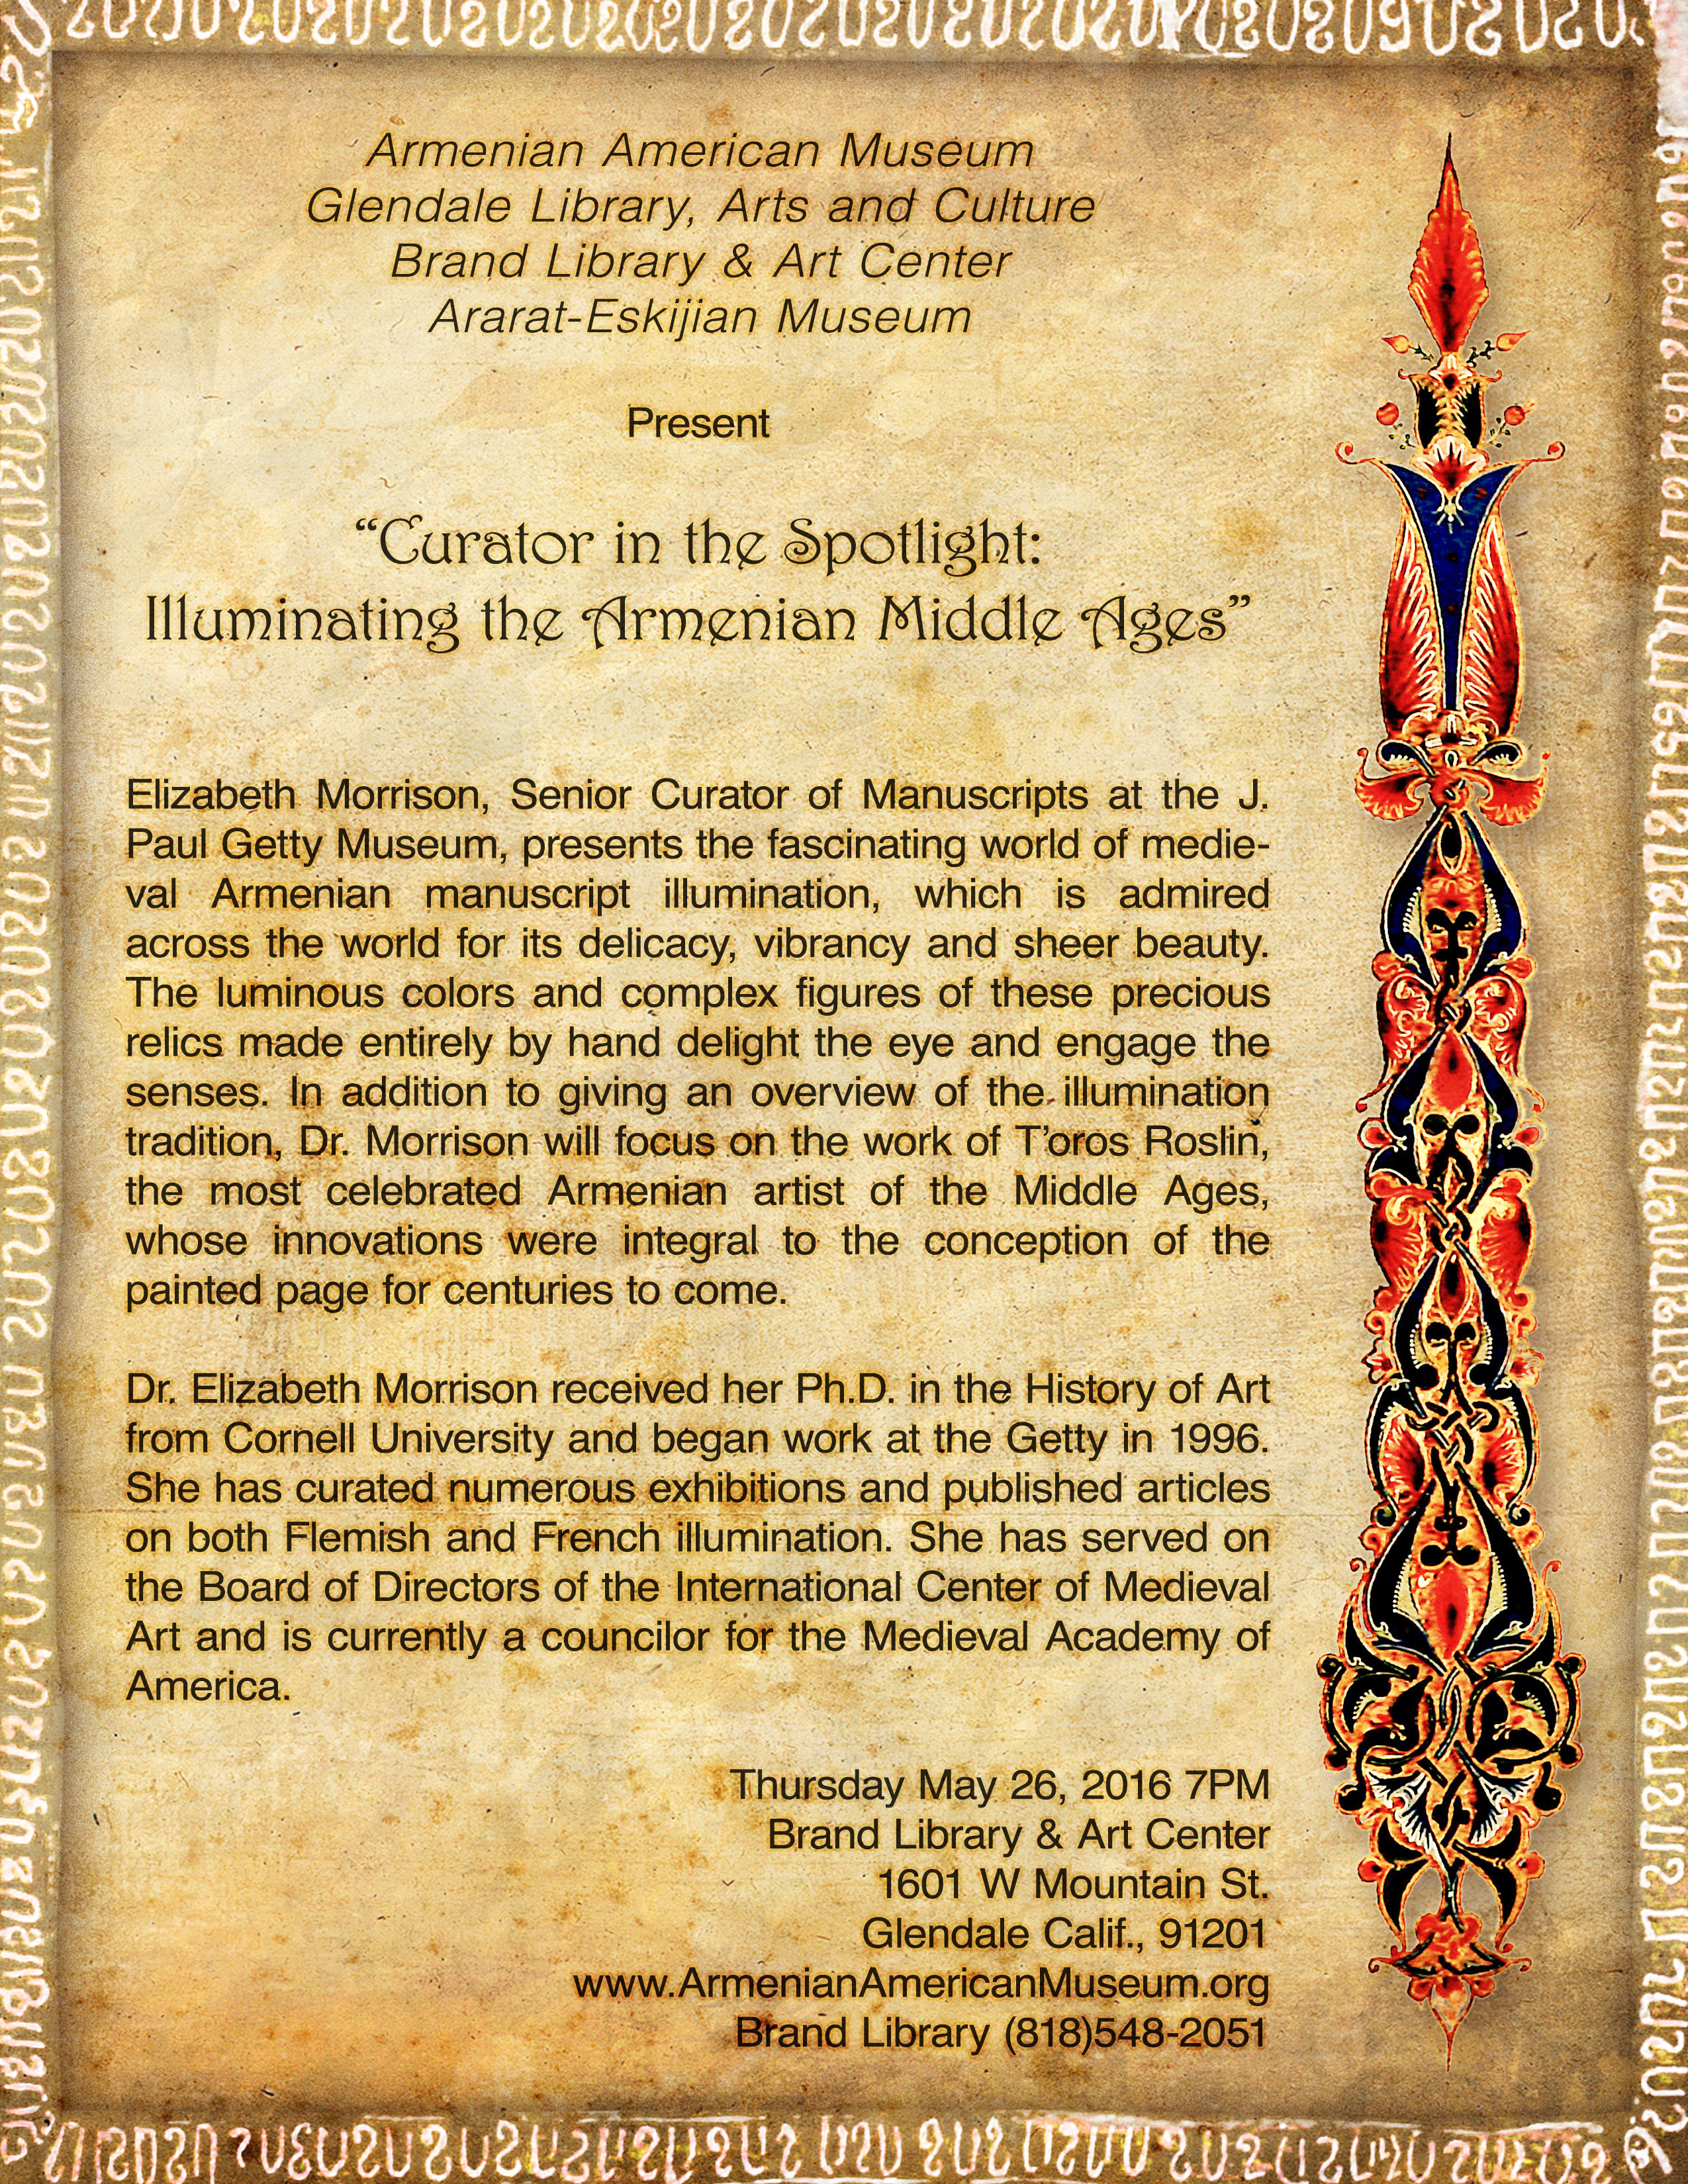 Curator-in-the-Spotlight--Illuminating-the-Armenian-Middle-Ages(1)